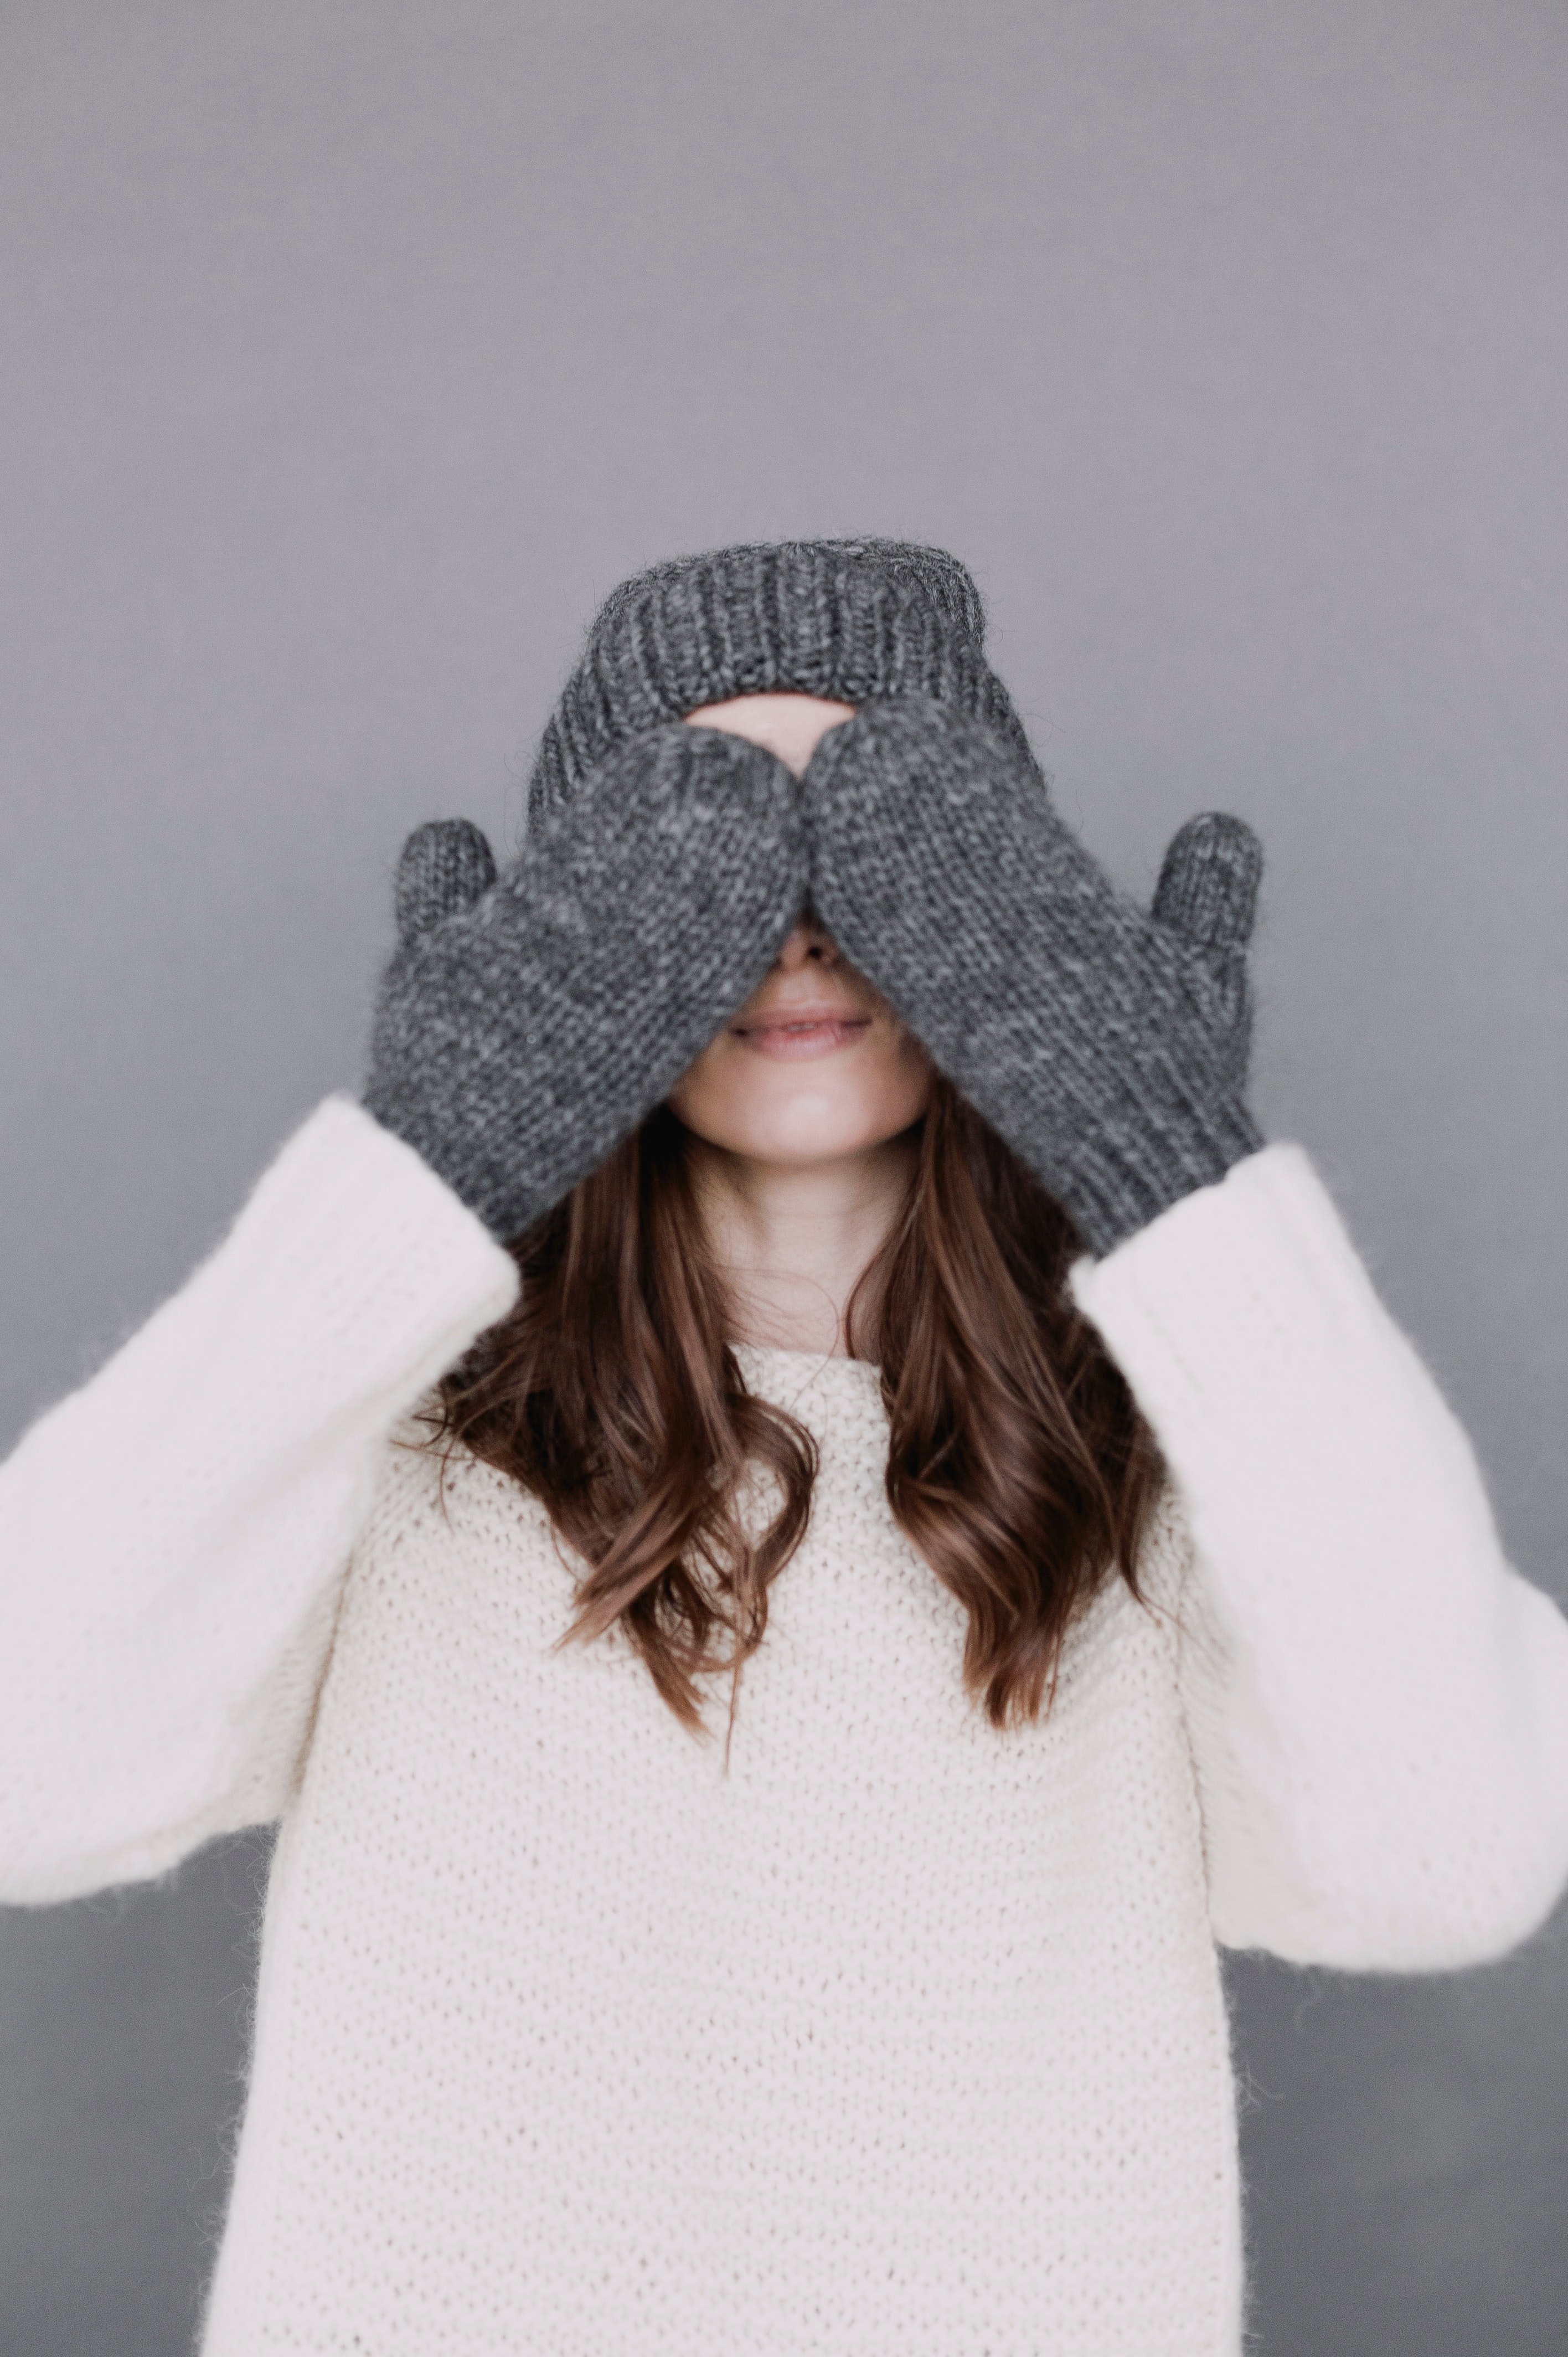 Woman covering her eyes with her hands photo